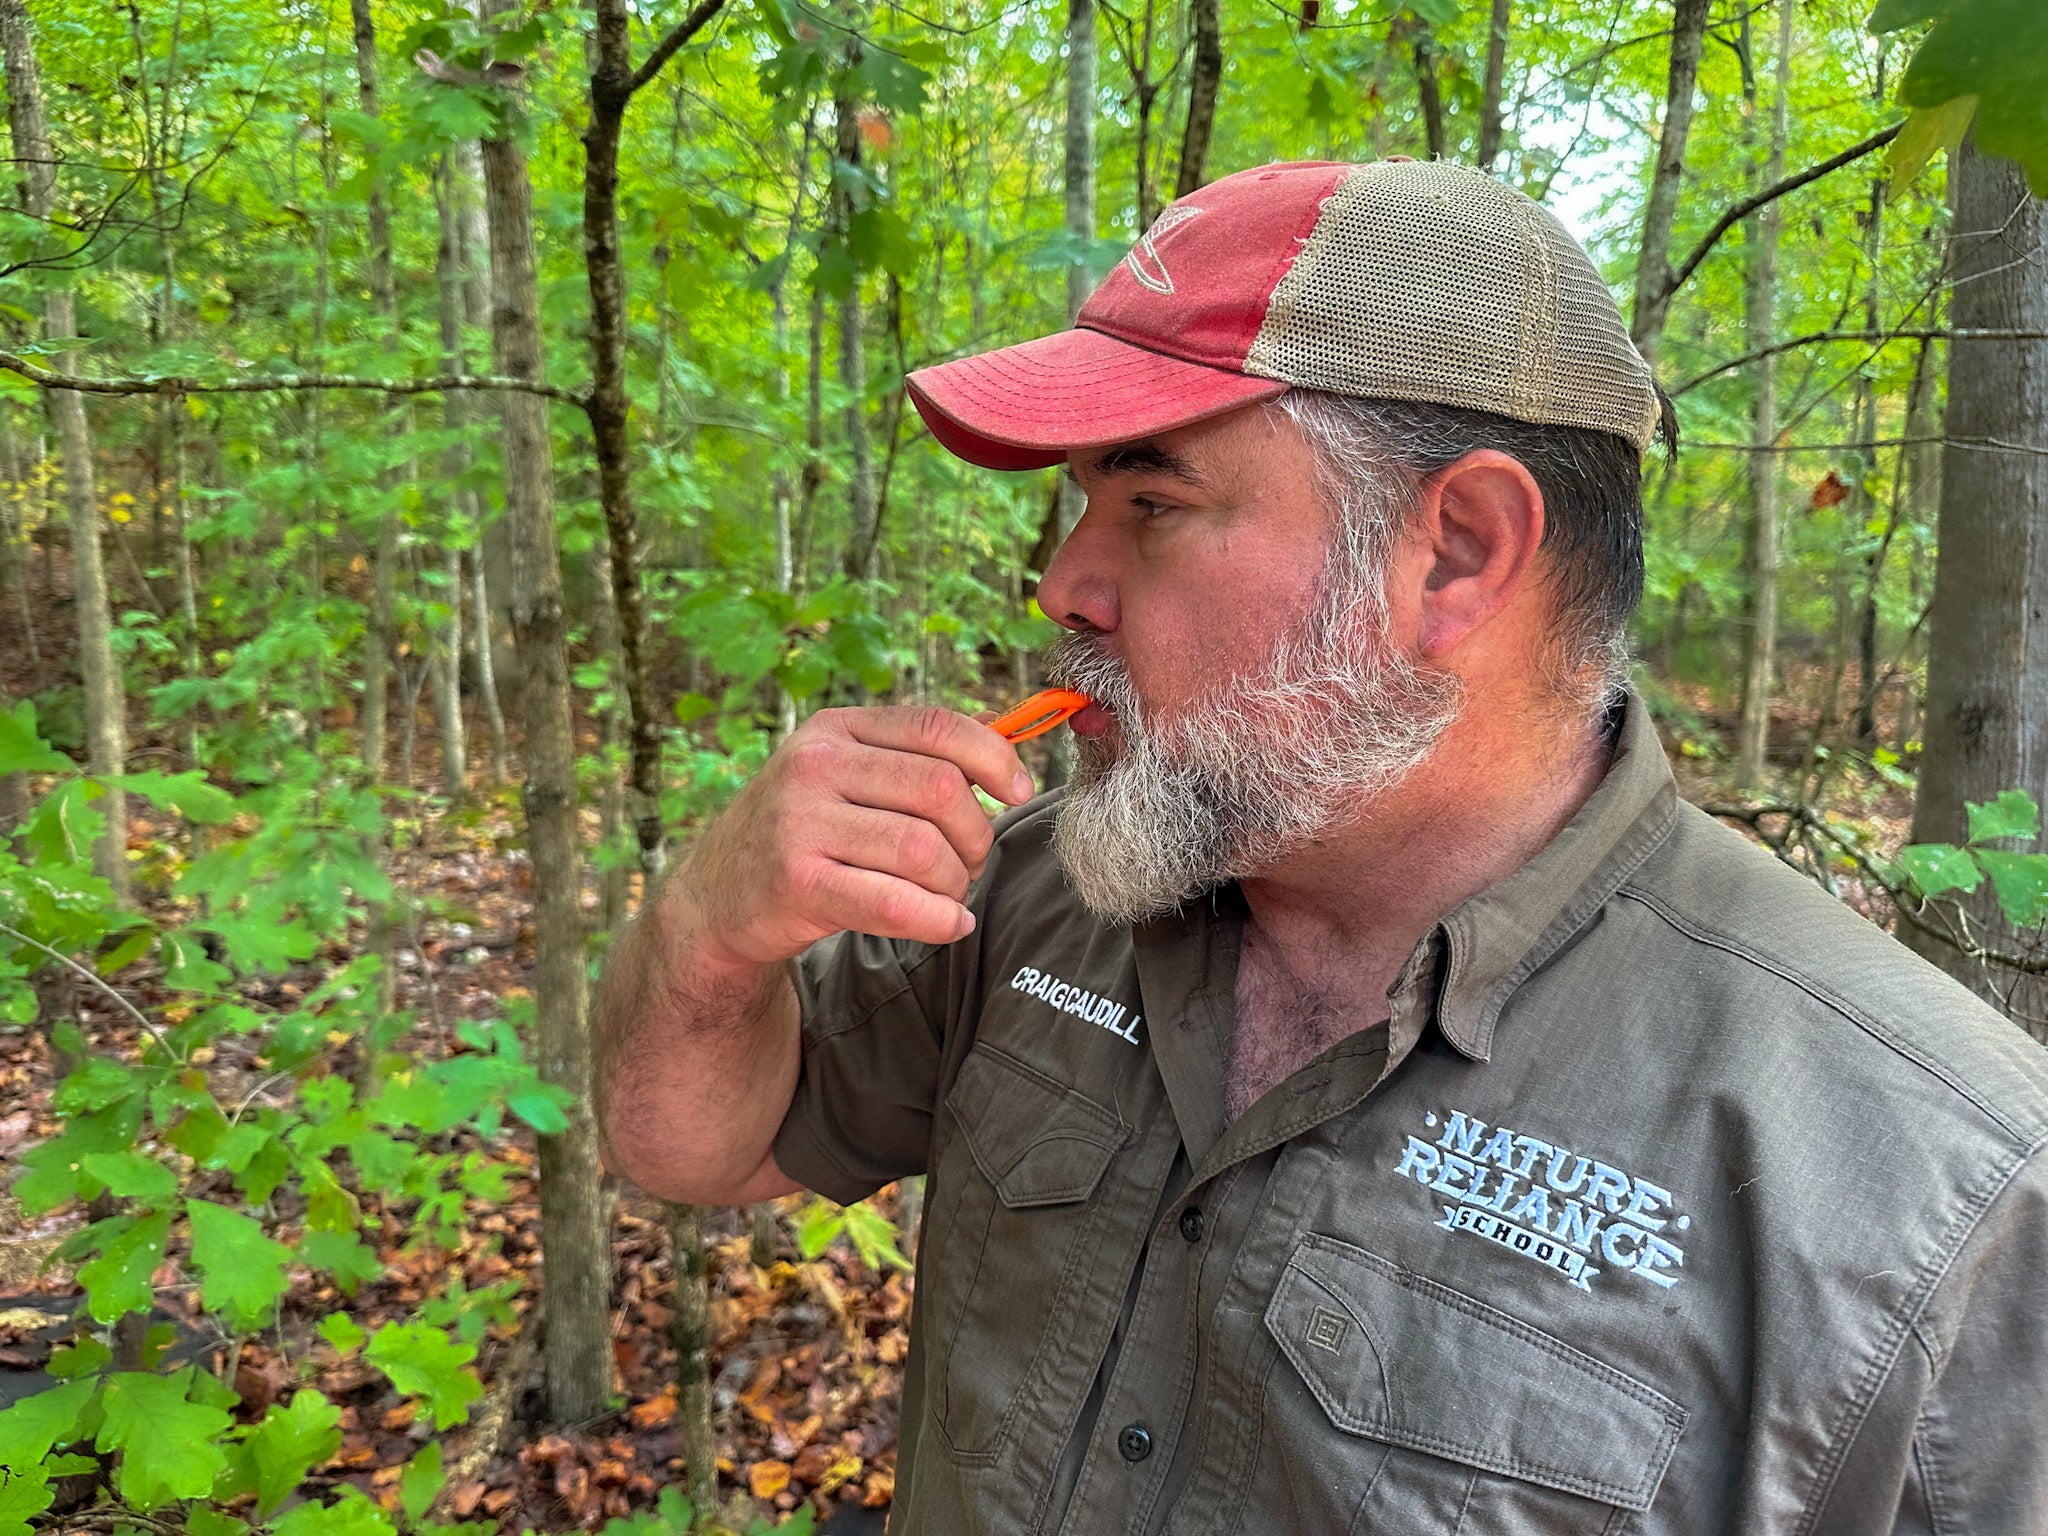 A man wearing a gray shirt and red hat blows a survival whistle in a the woods